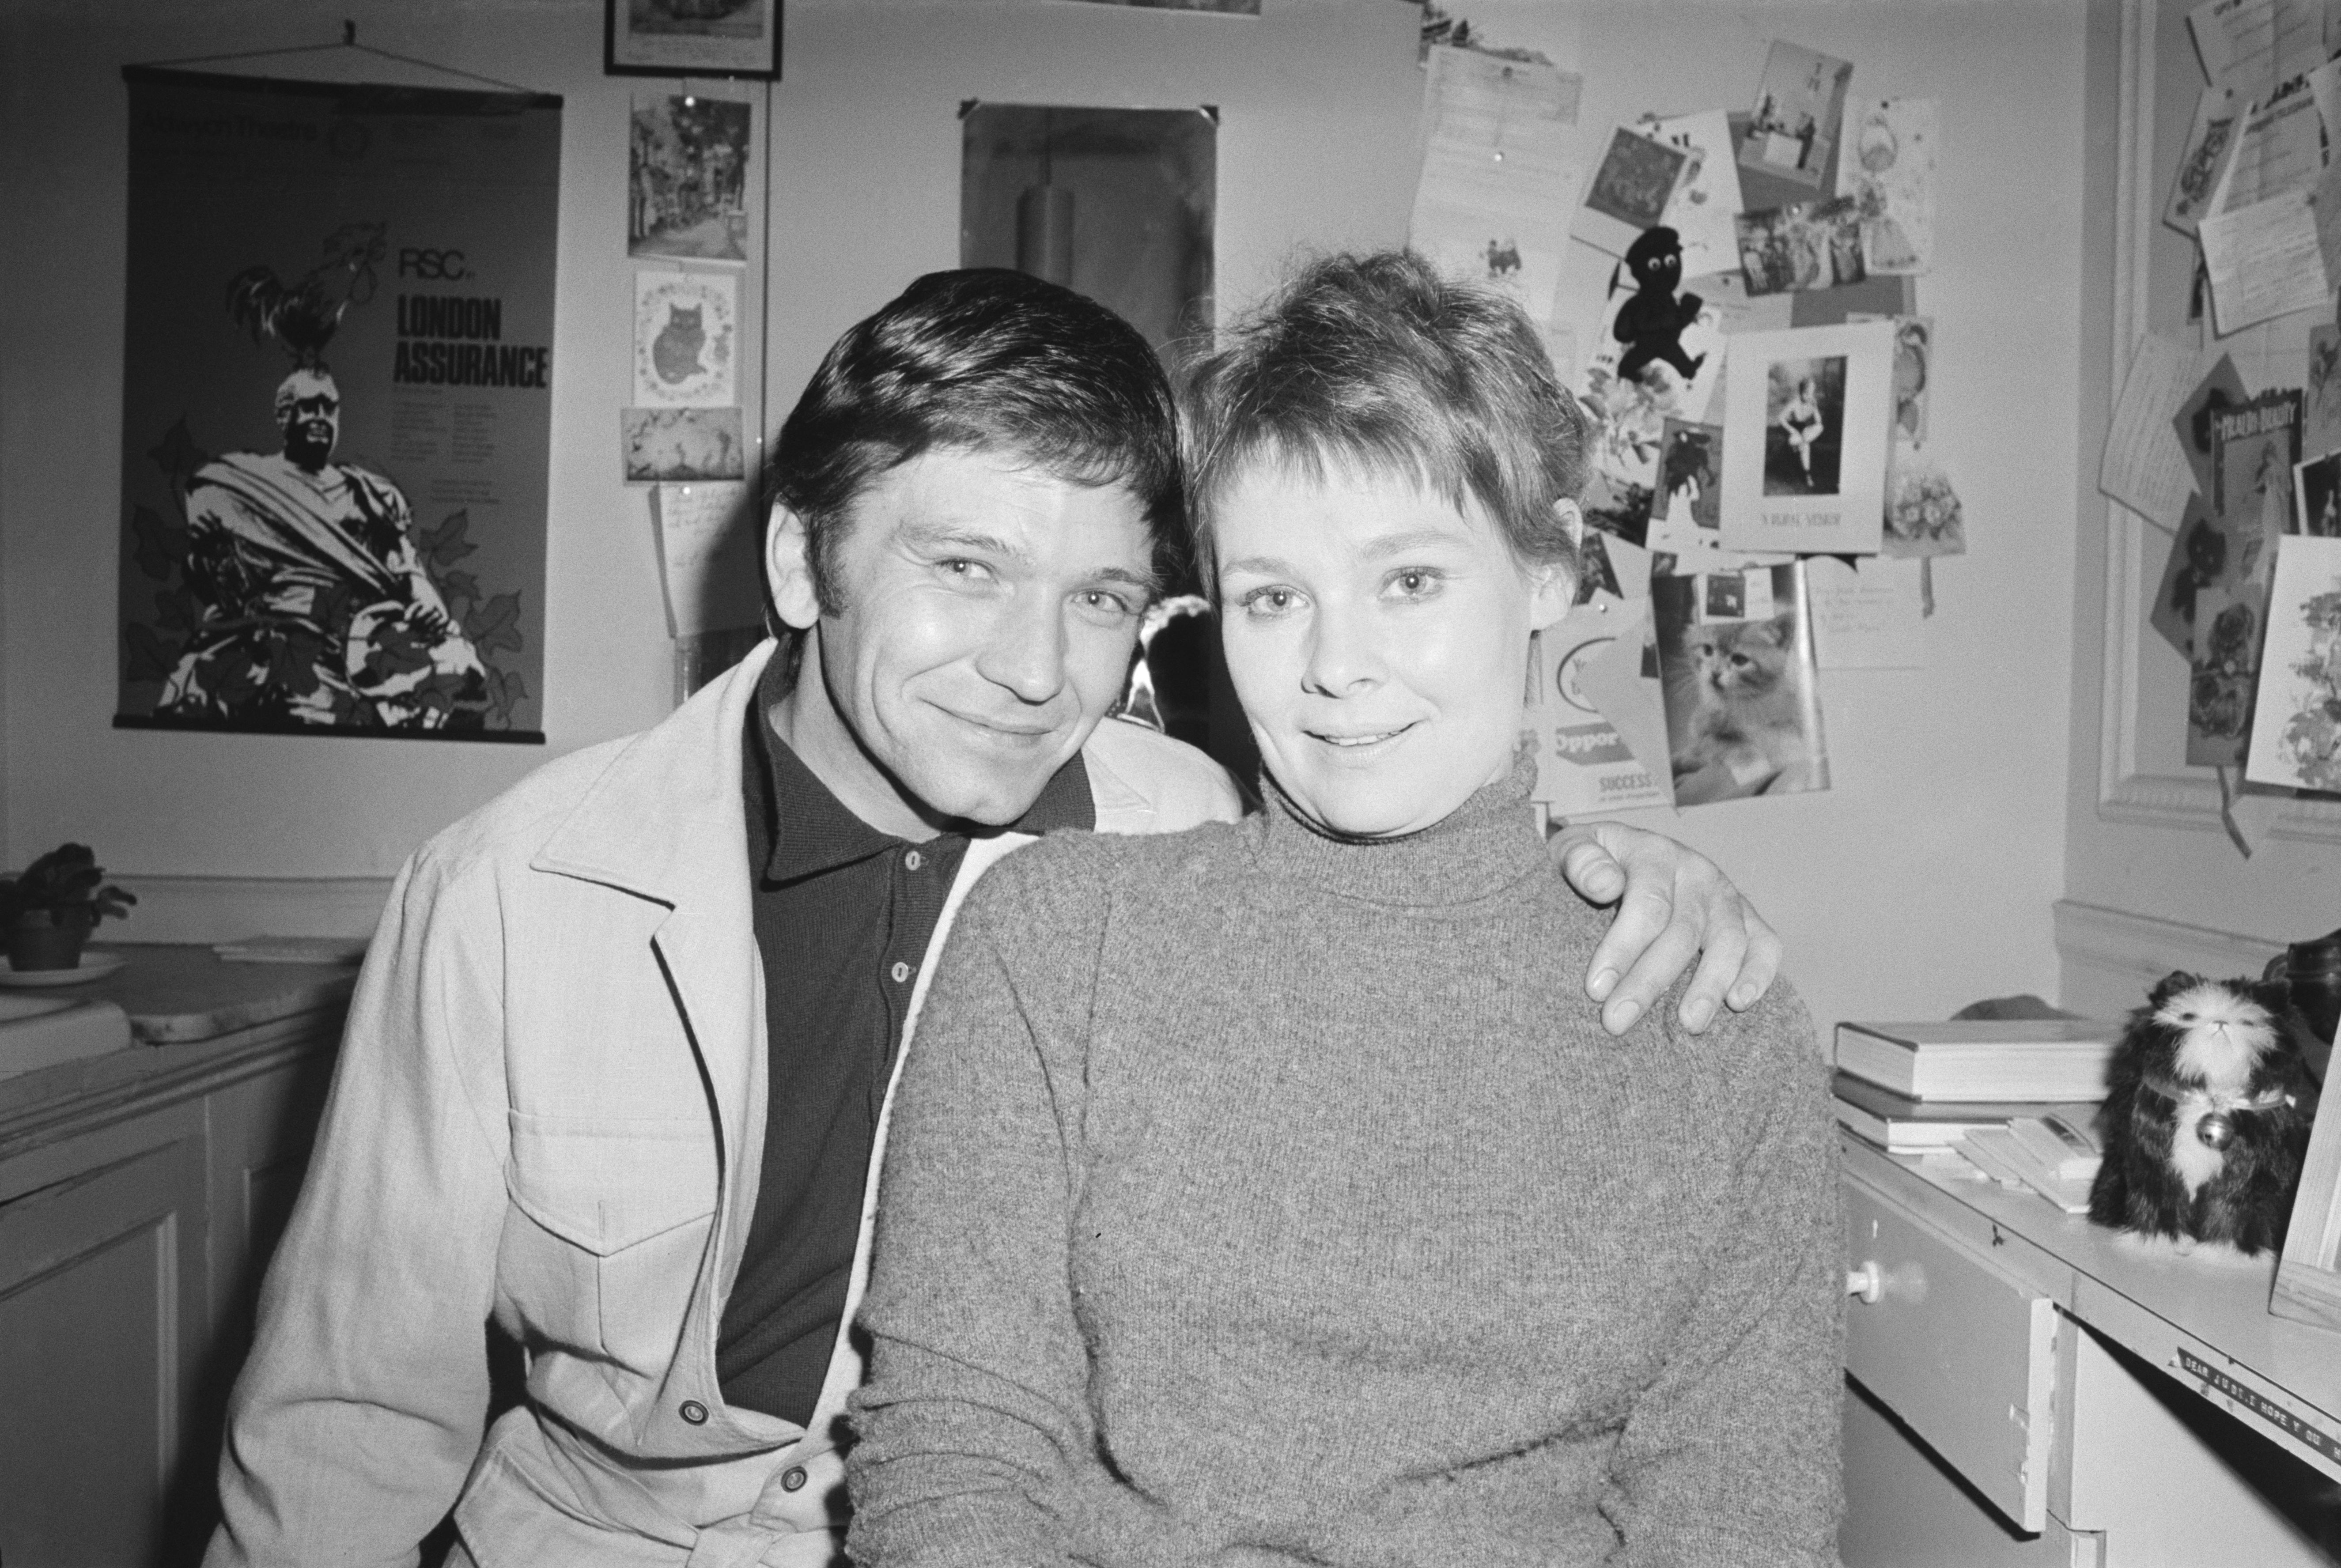 Dench and Williams in 1970